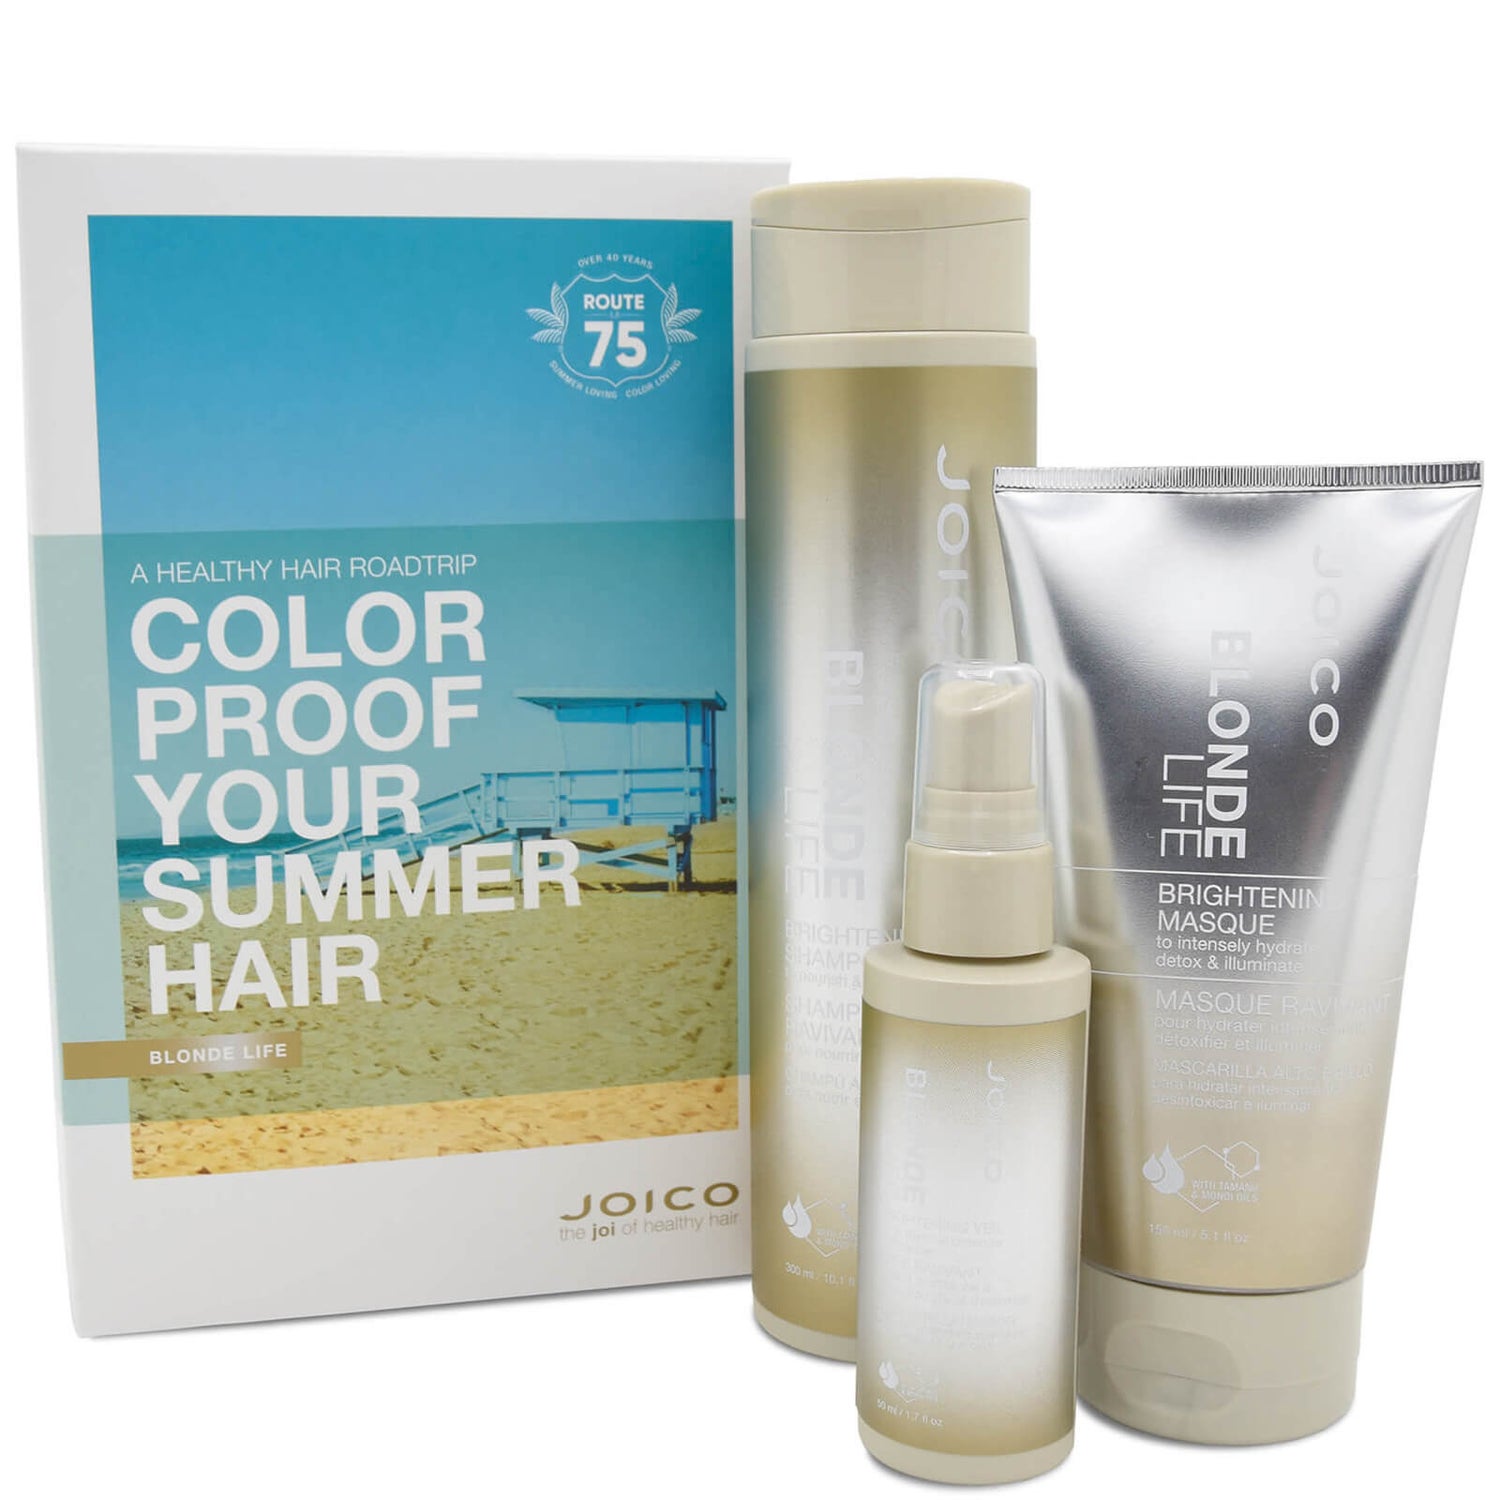 Joico Blonde Life Color Proof Your Summer Hair Trio Pack